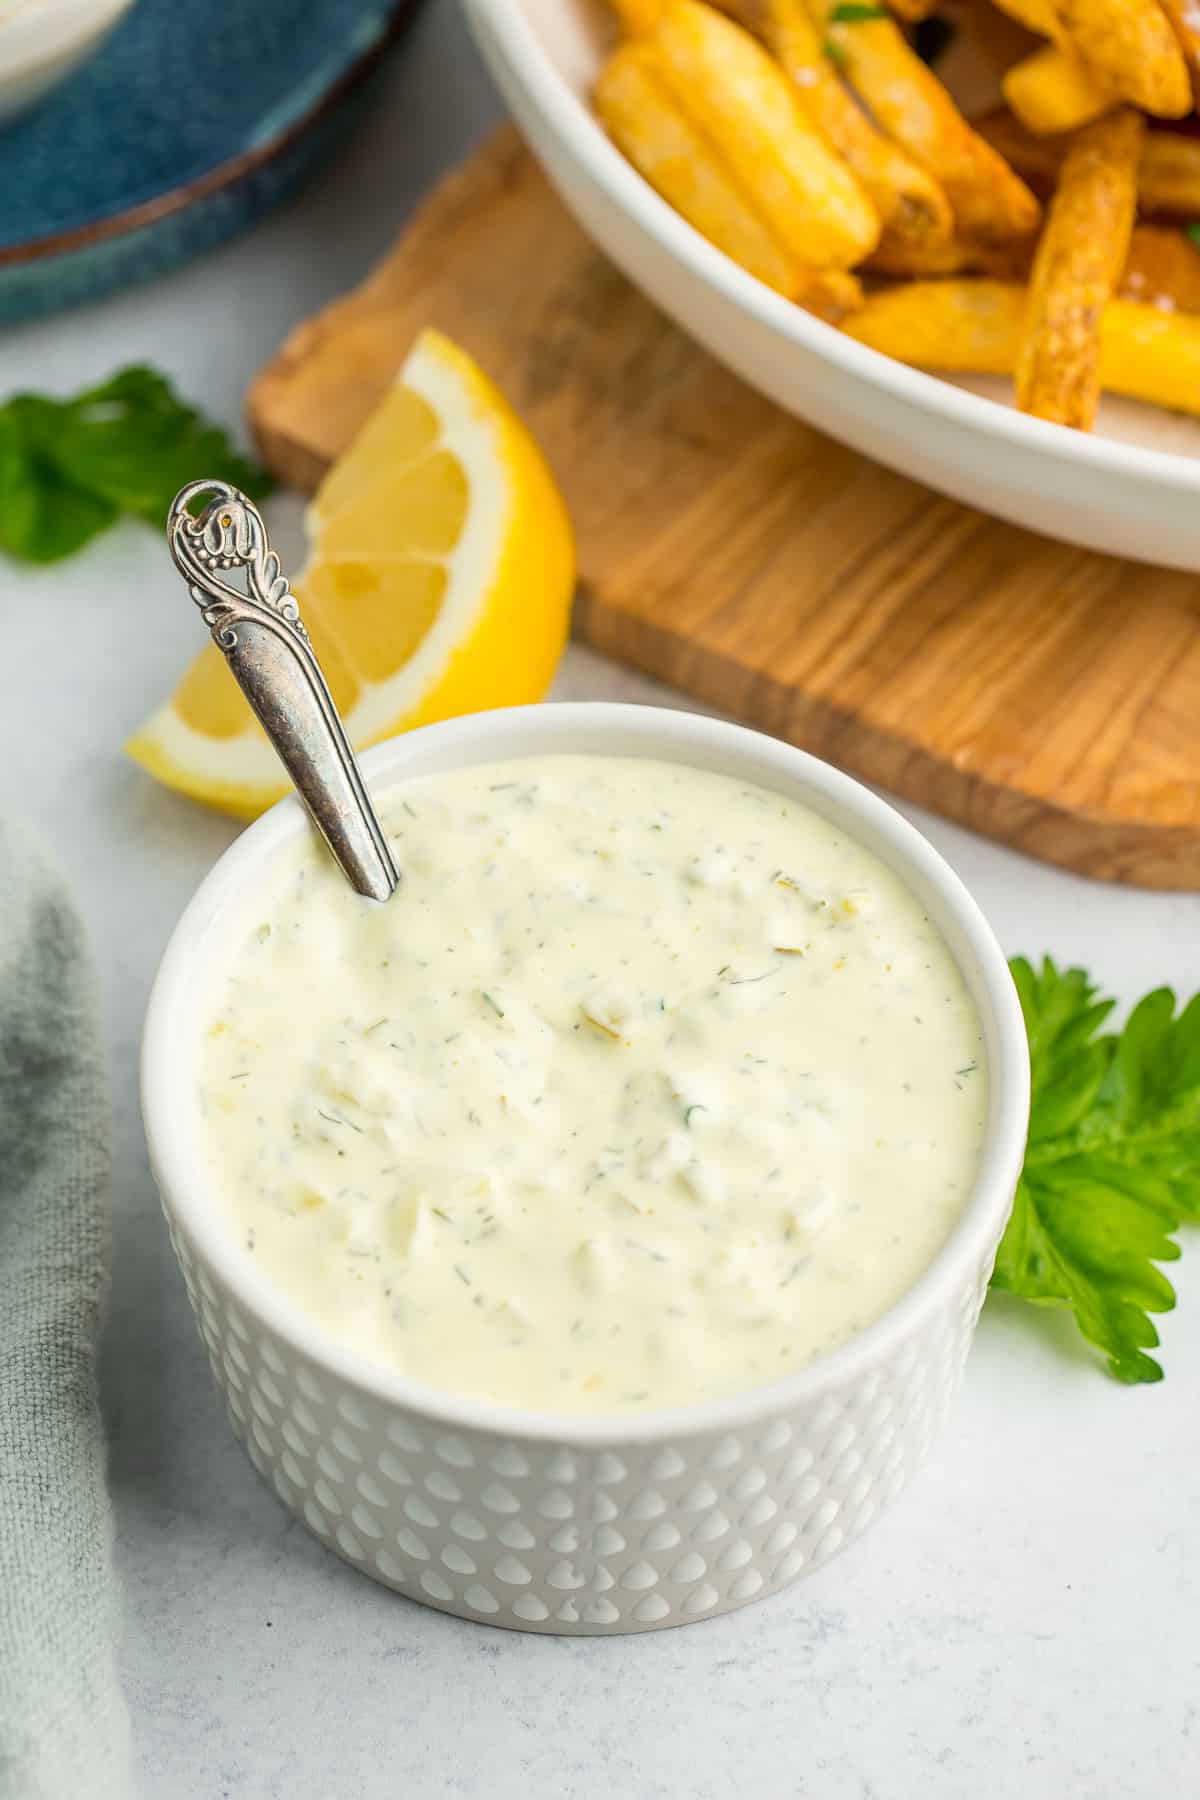 a white textured dish filled with homemade tartar sauce with a small bronze spoon in it.